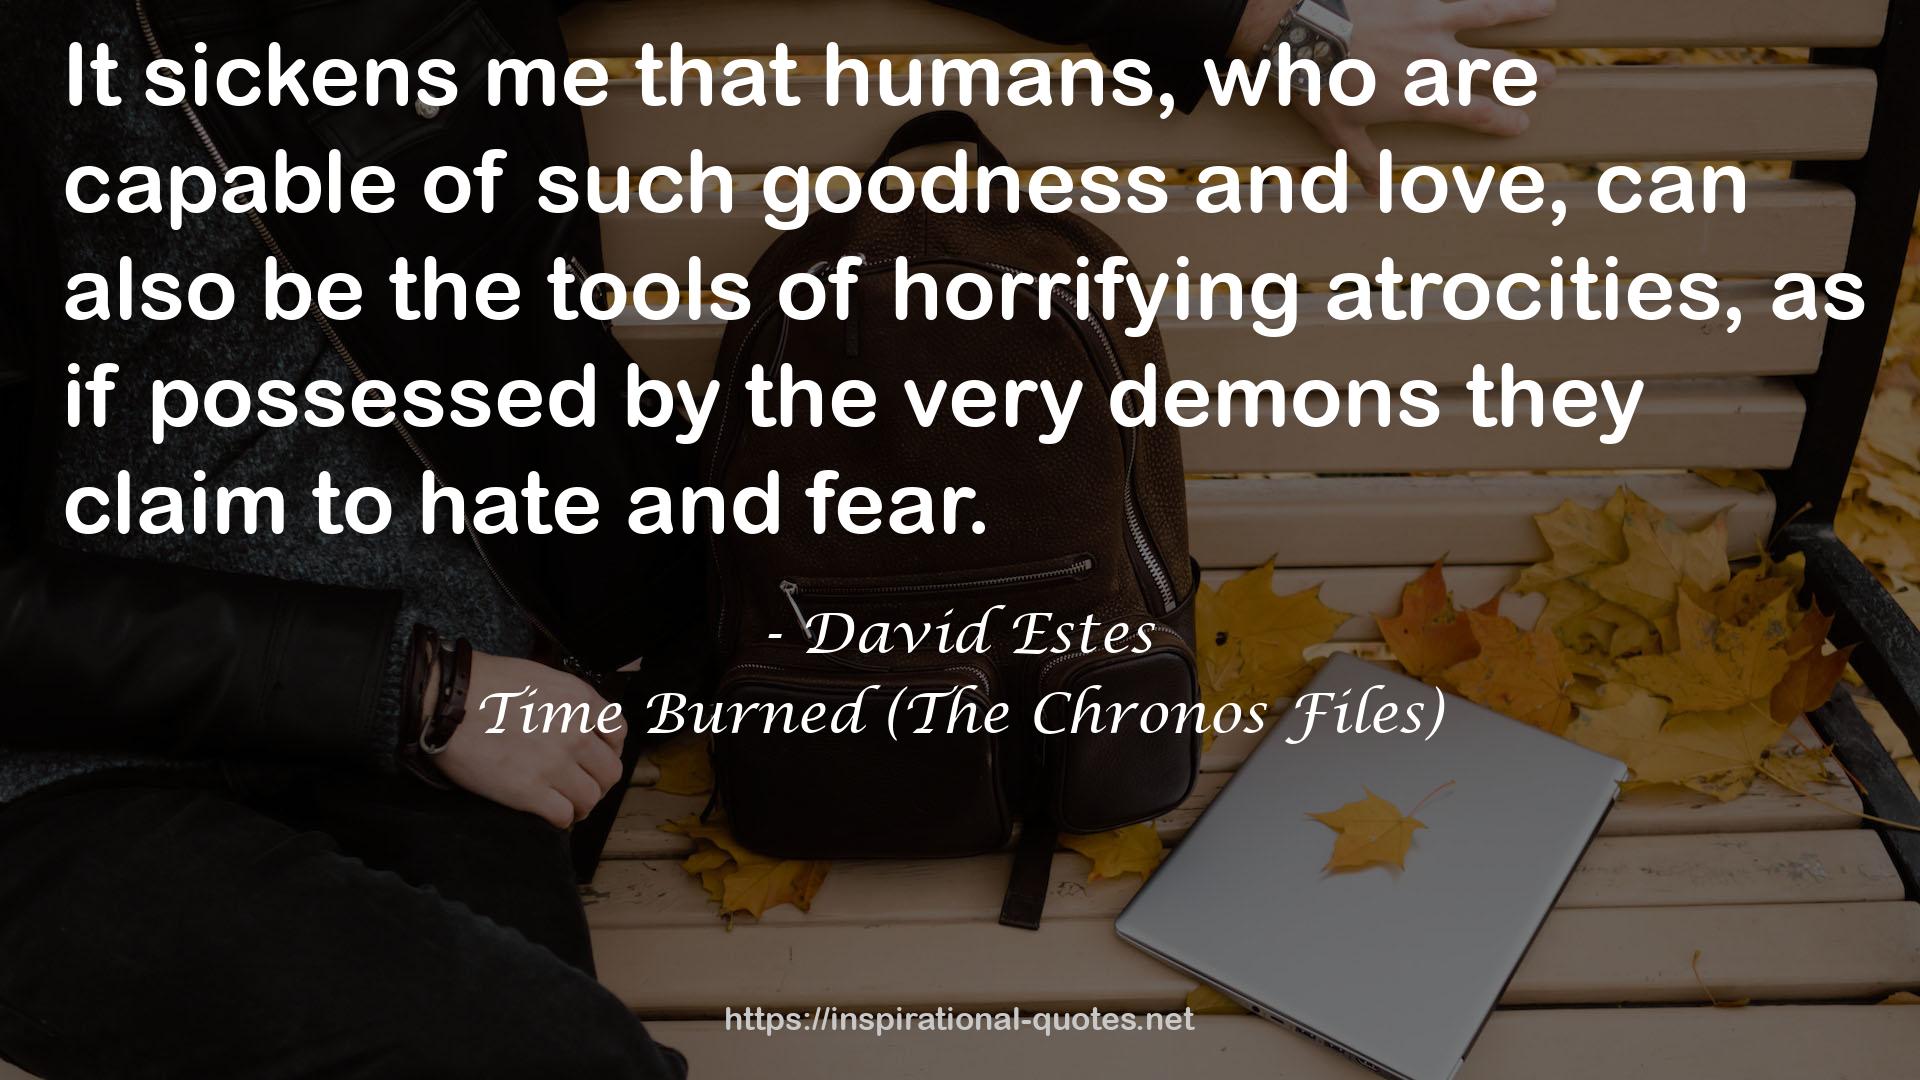 Time Burned (The Chronos Files) QUOTES